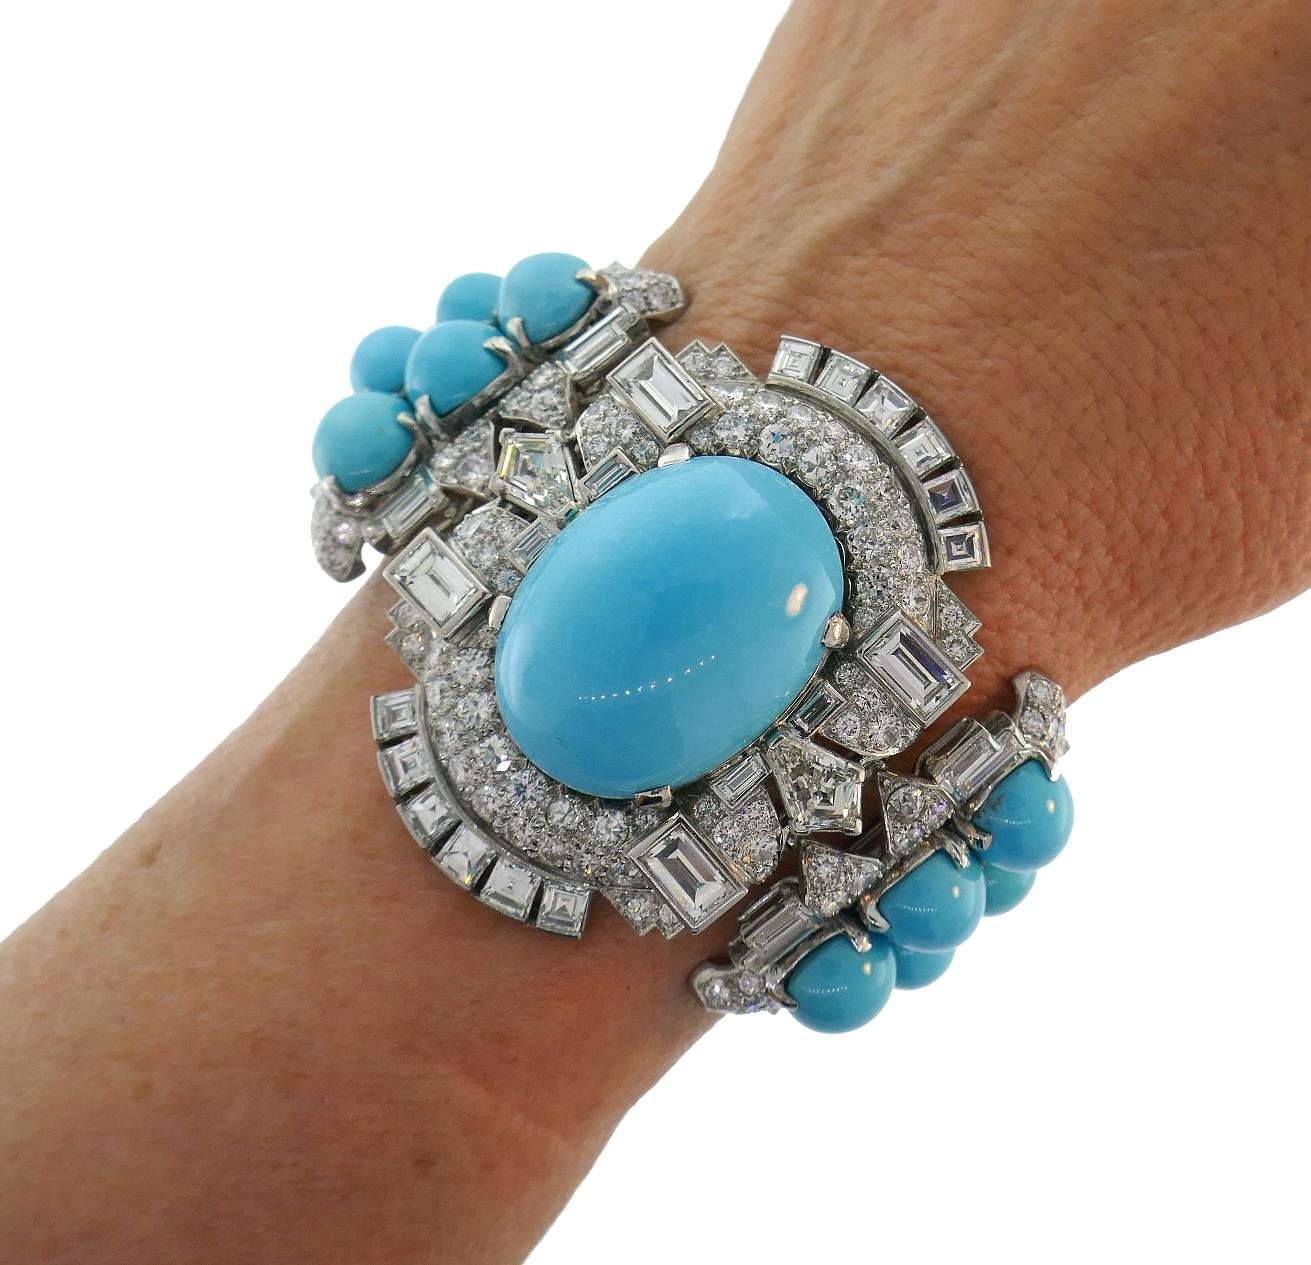 Outstanding Art Deco Revival bracelet created by Trabert & Hoeffer-Mauboussin in the 1930s.
Made of platinum, the bracelet features approximately 127 carats Persian turquoise and
22.26 carats of diamonds. The diamonds are G- H color and VS clarity